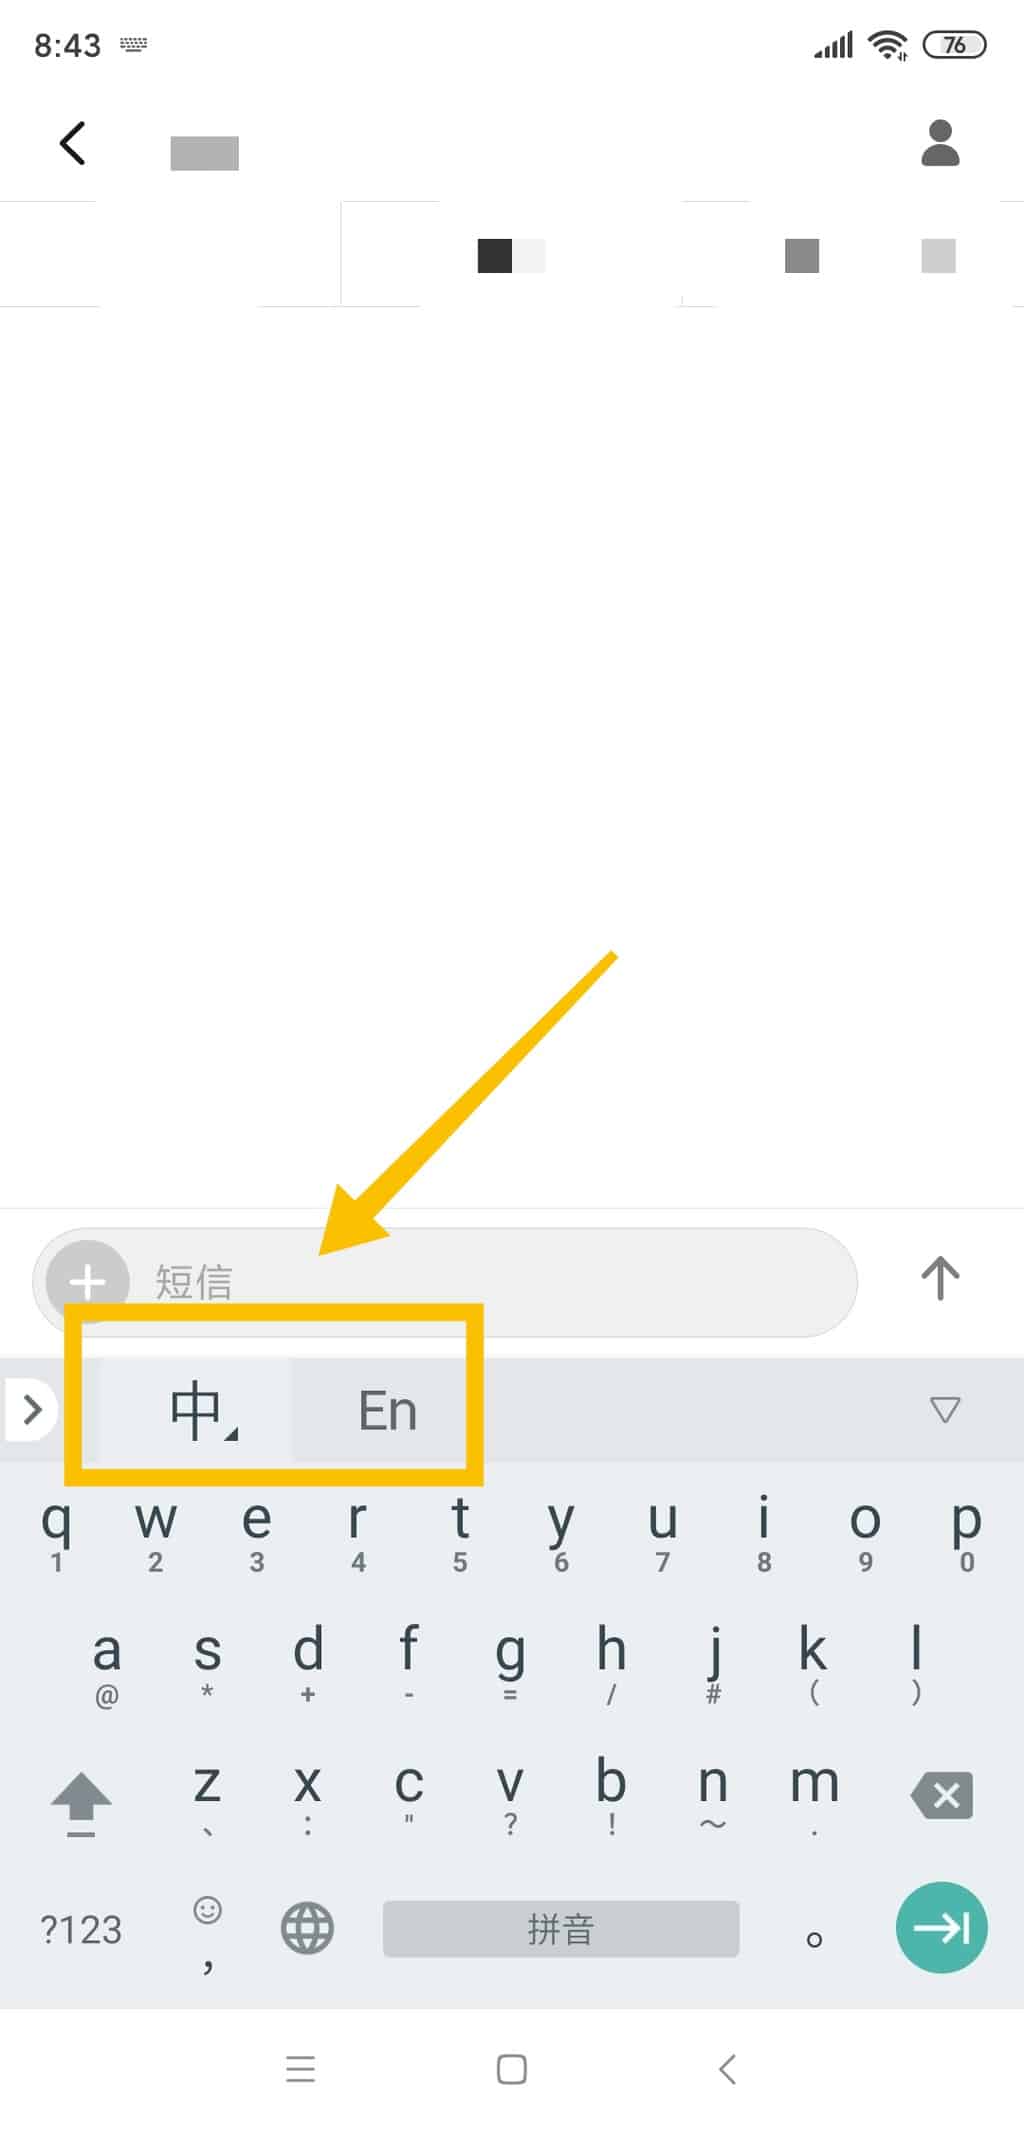 How to Type in Pinyin with Tone Marks on Your Phone or Computer